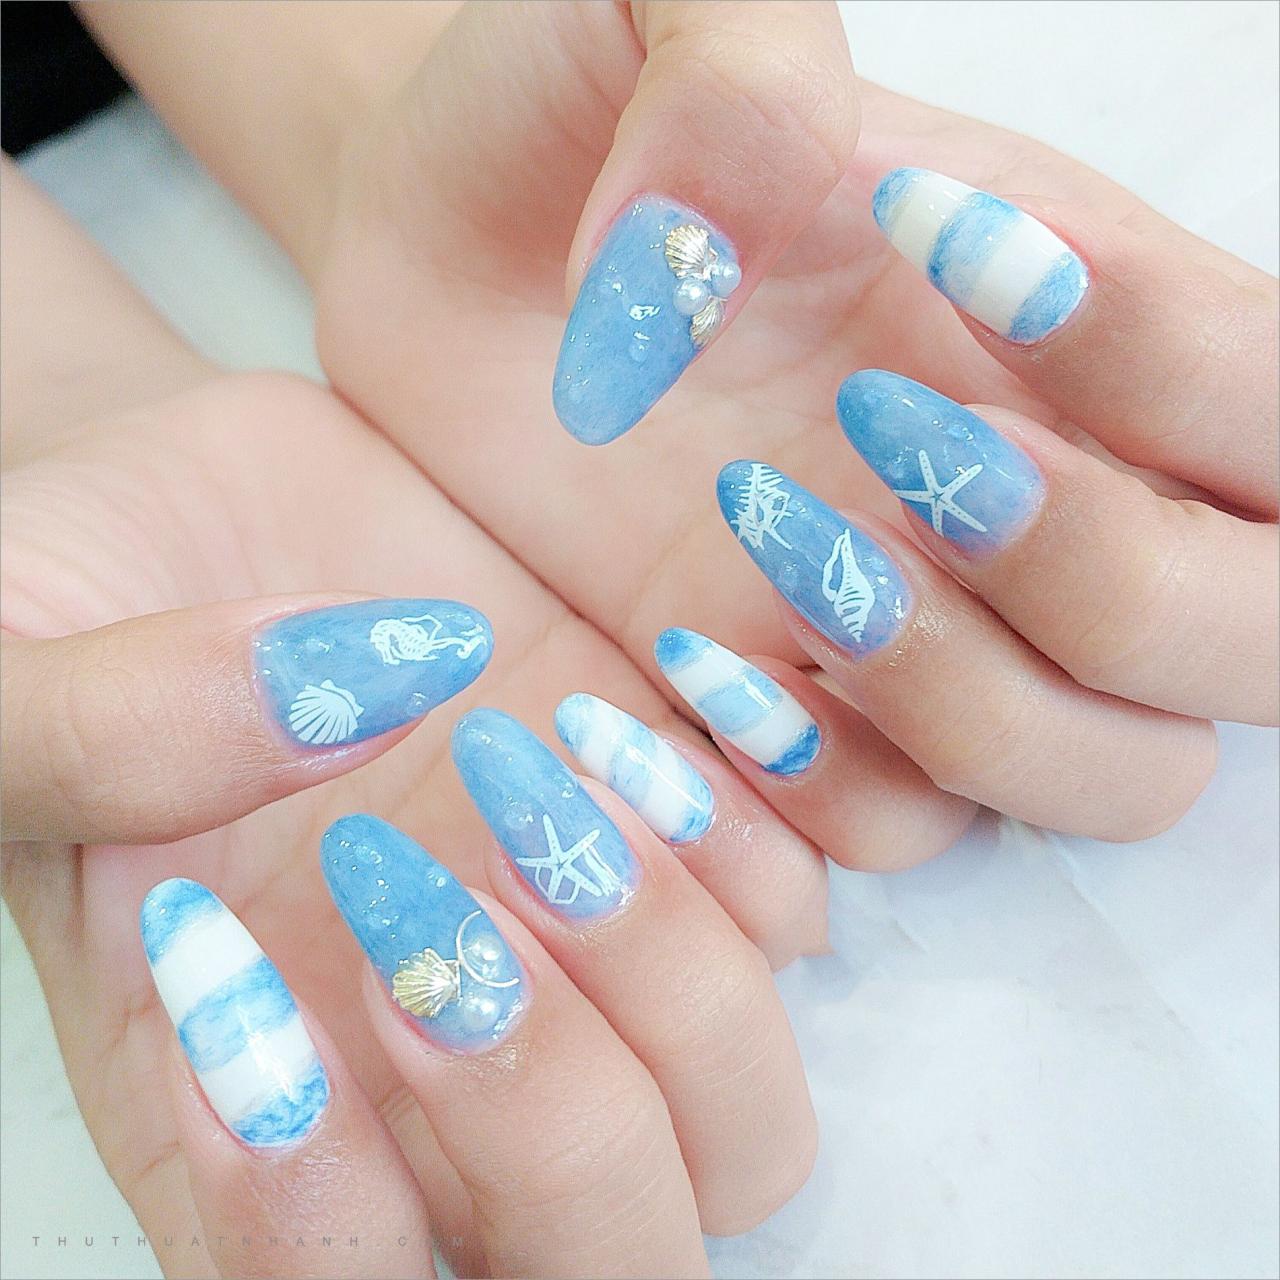 Top 10 very beautiful summer nail designs that promise to cause a fever this year